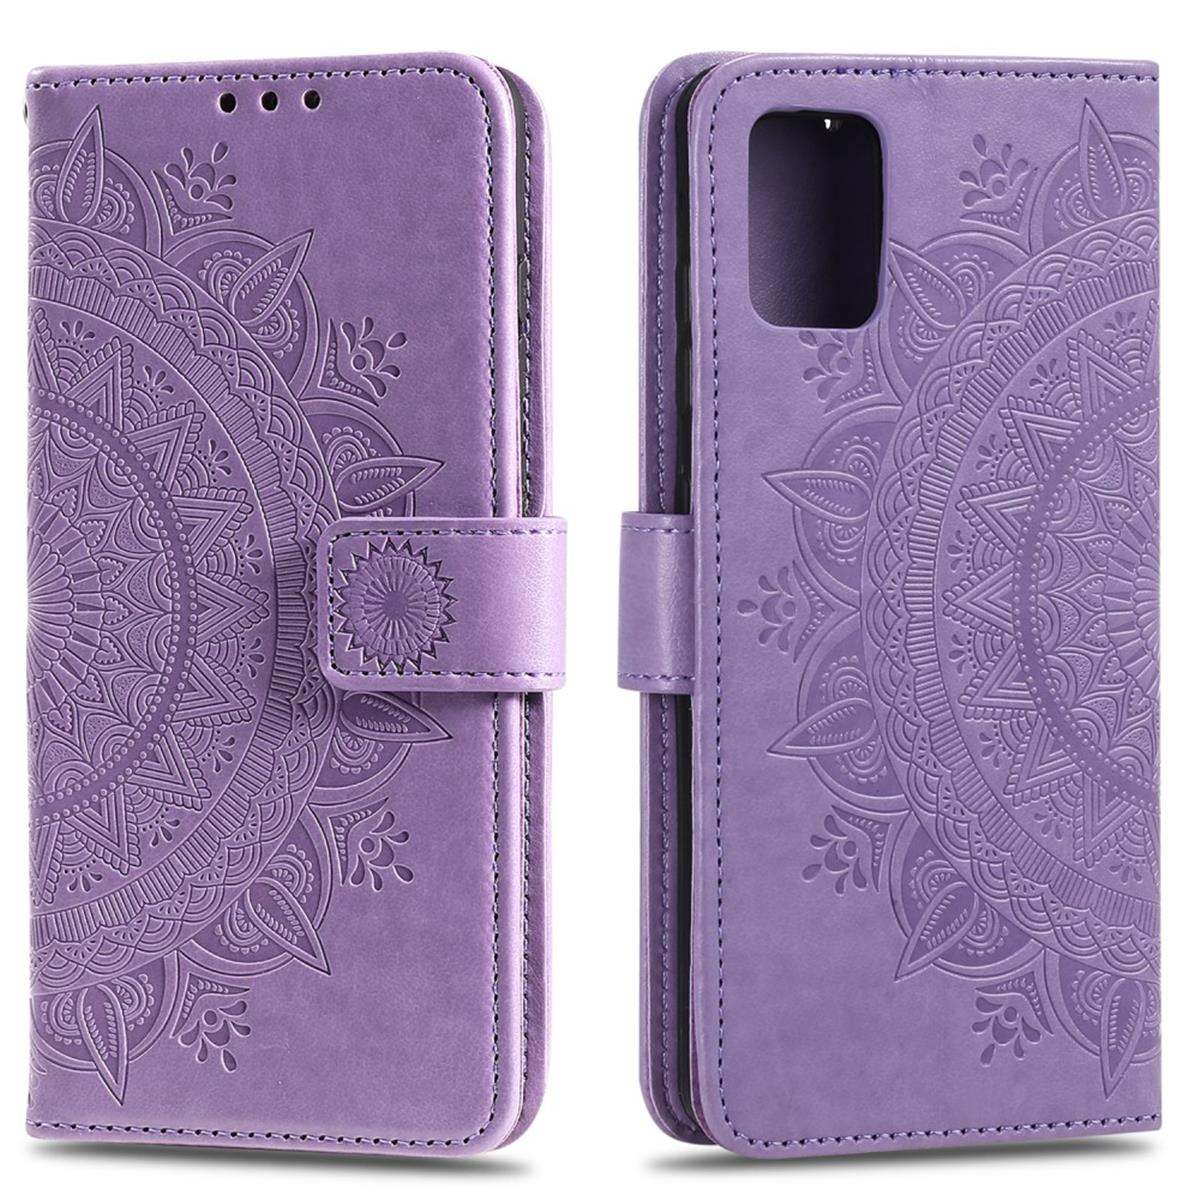 COVERKINGZ Mandala Galaxy Bookcover, A51, mit Lila Muster, Samsung, Klapphülle